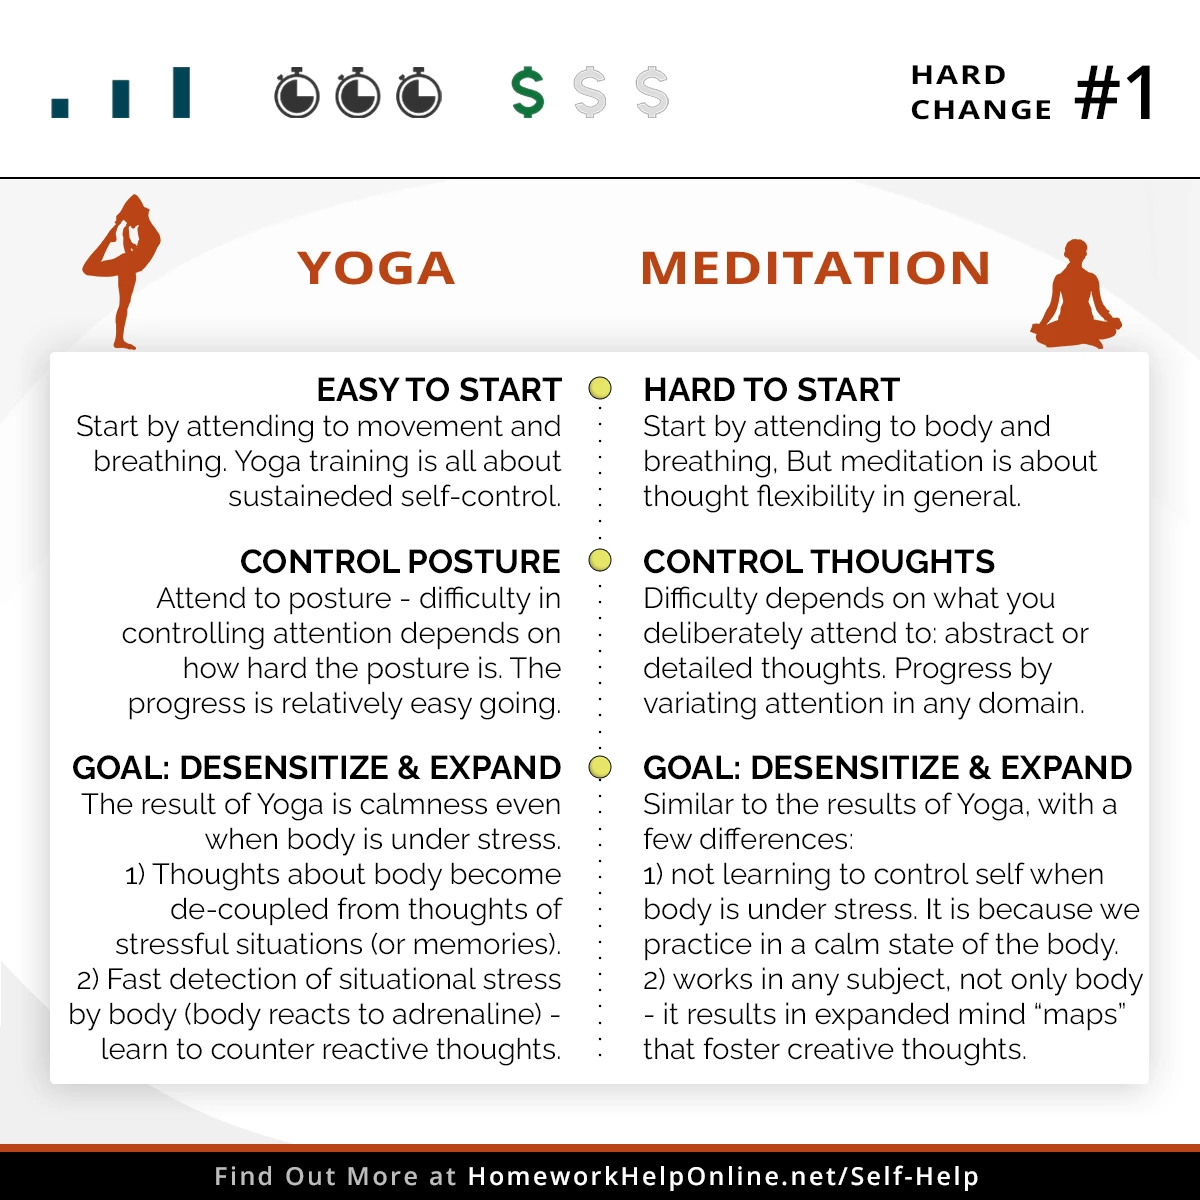 Comparison of Yoga and Meditation. Easy of starting, Control goals, Teaching Resources.